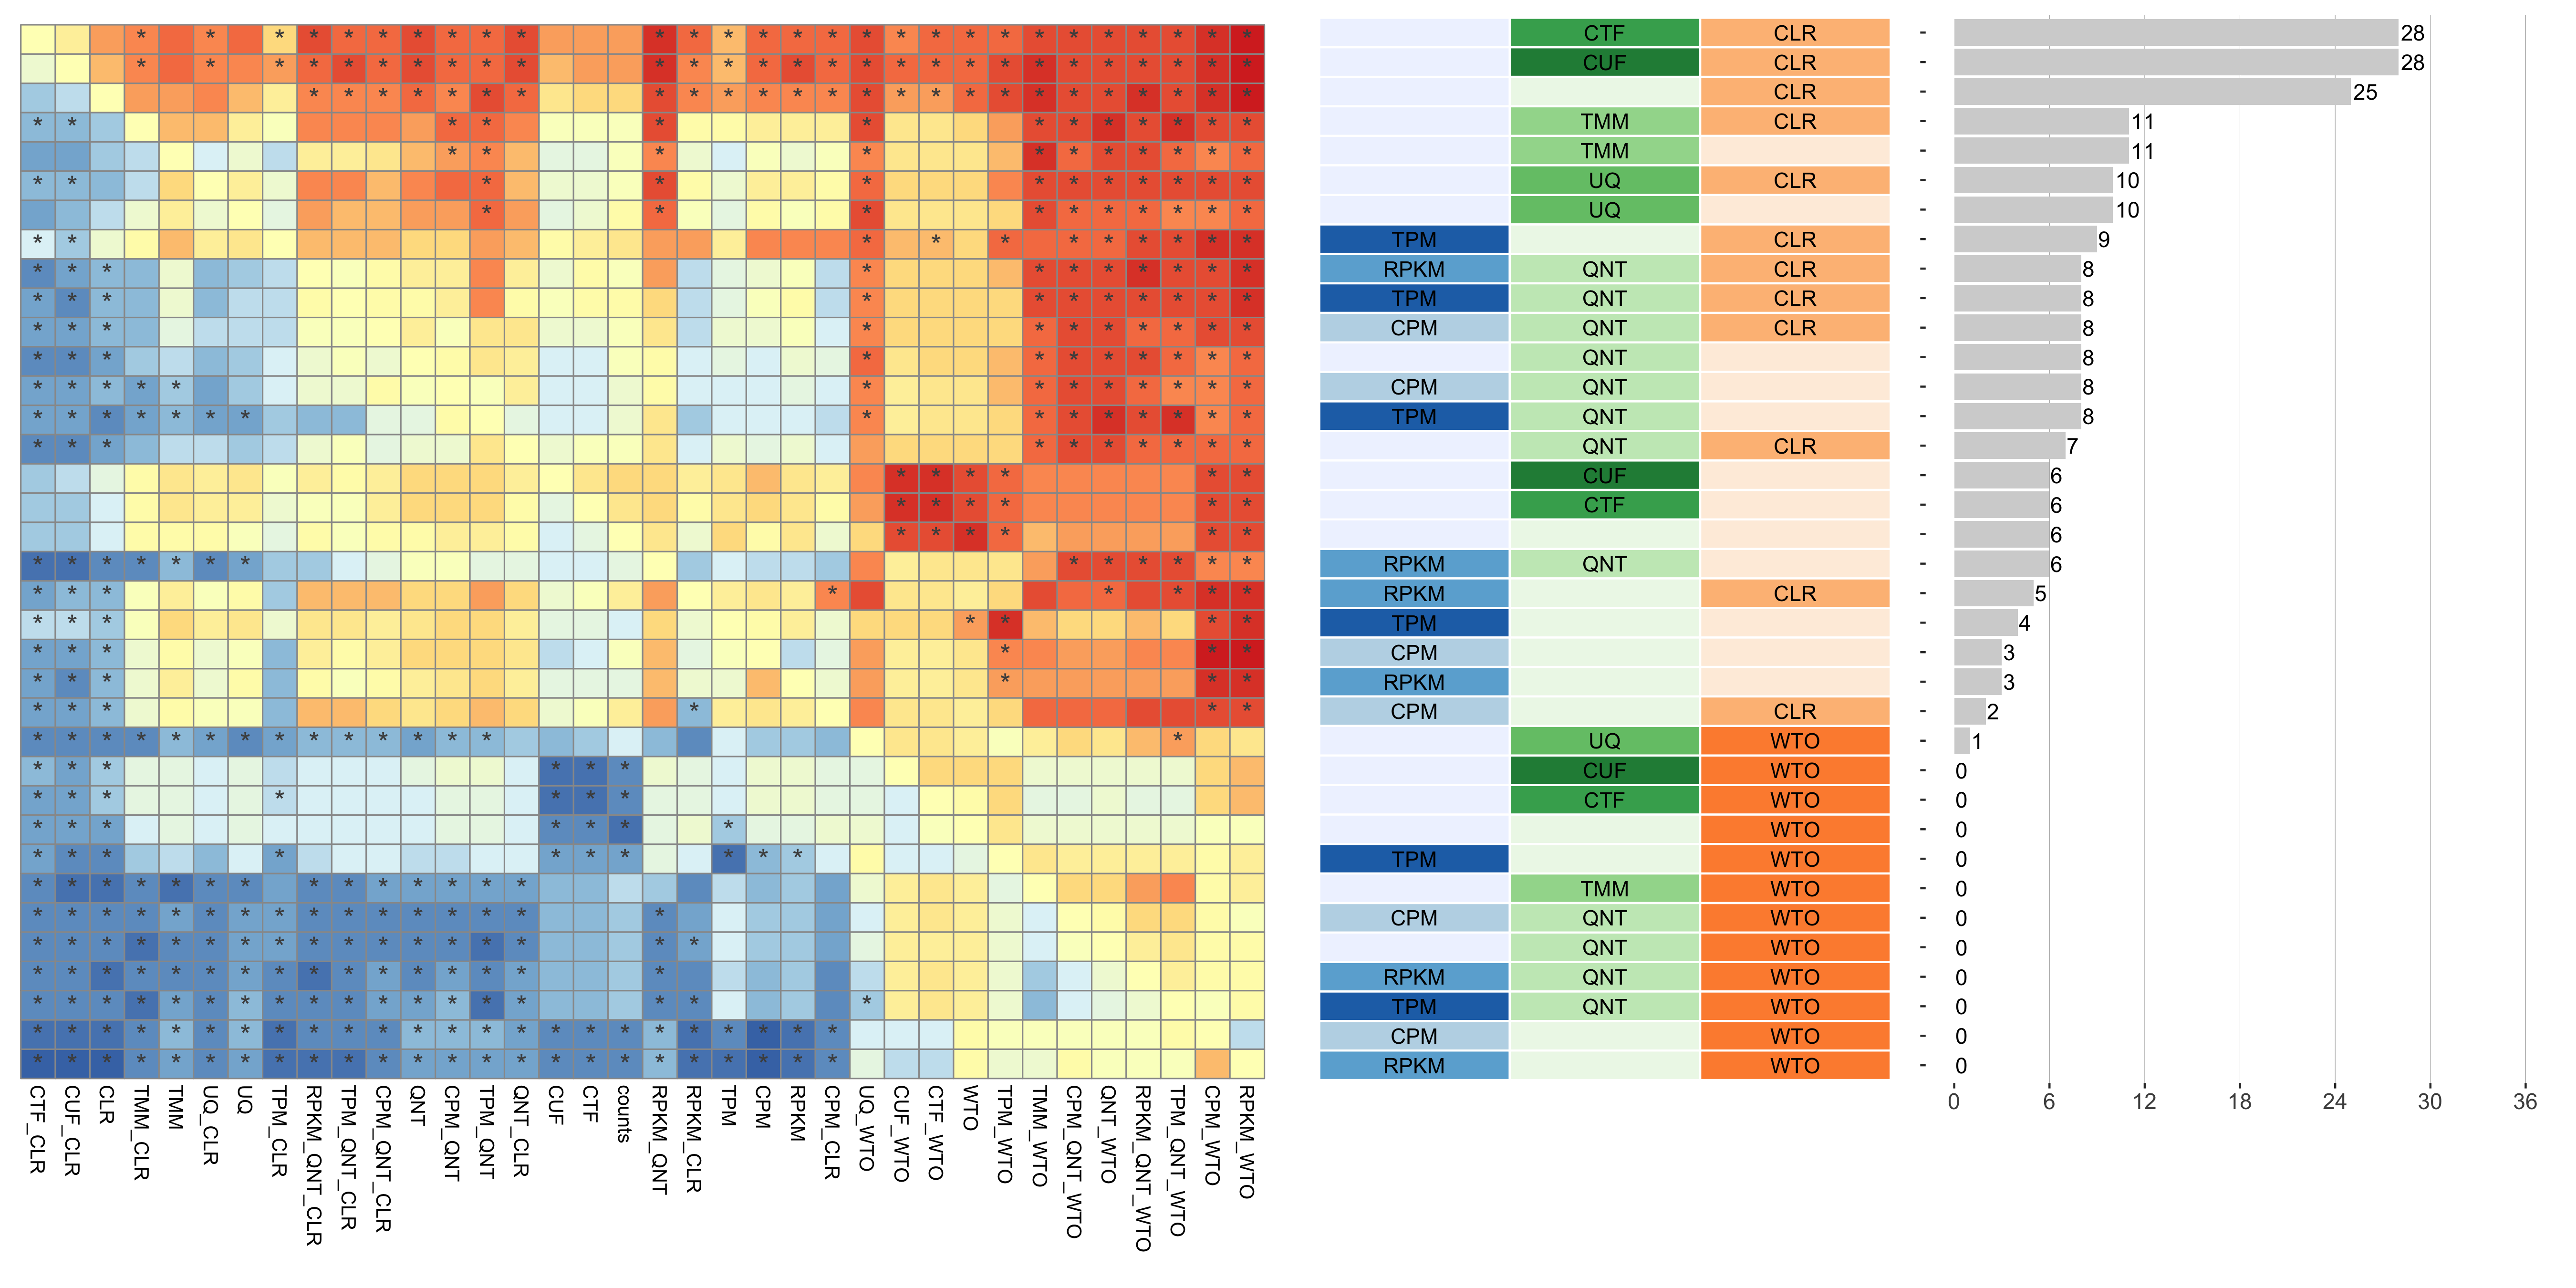 **Dataset-level pairwise comparison of workflow performance.** (**left**) The heatmap shows the relative performance of a pair of workflows, corresponding to a row and a column, directly compared to each other for the GTEx datasets based on the tissue-aware gold standard. The color in each cell (row, column) represents the proportion of datasets for which the workflow along the row has a higher log2(auPRC/prior) than the workflow along the column. Comparisons that are statistically significant (corrected p < 0.01) based on a paired Wilcoxon test are marked with an asterisk. (**middle**) The workflows (rows) are described in terms of the specific method used in the within-sample normalization (blues), between-sample normalization (greens), and network transformation (oranges) stages. (**right**) The barplot shows the number of times each workflow was significantly greater than another workflow.